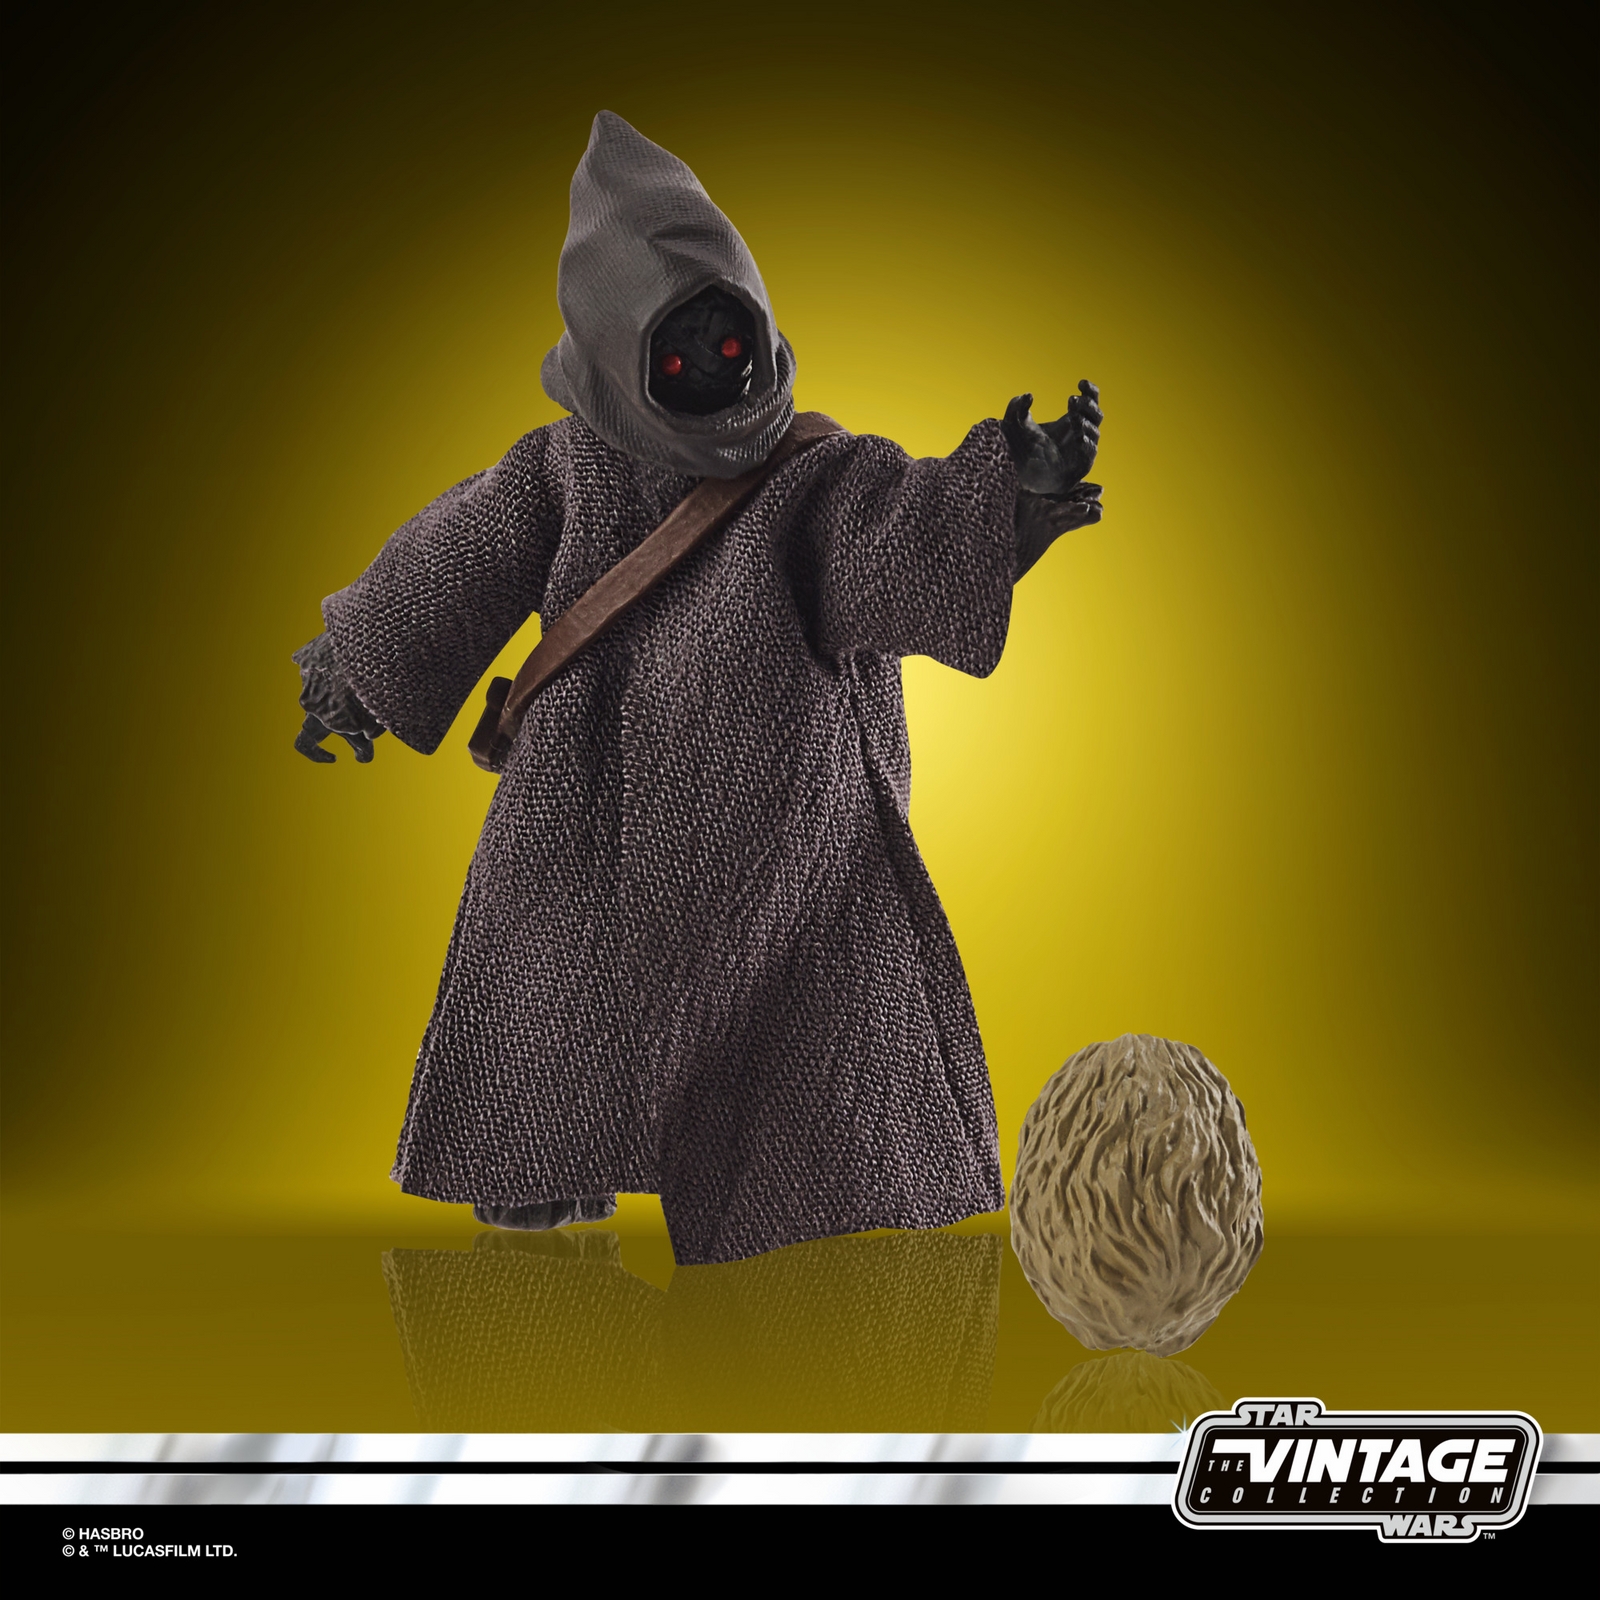 STAR WARS THE VINTAGE COLLECTION 3.75-INCH OFFWORLD JAWA (ARVALA-7) Figure  - oop (7).jpg